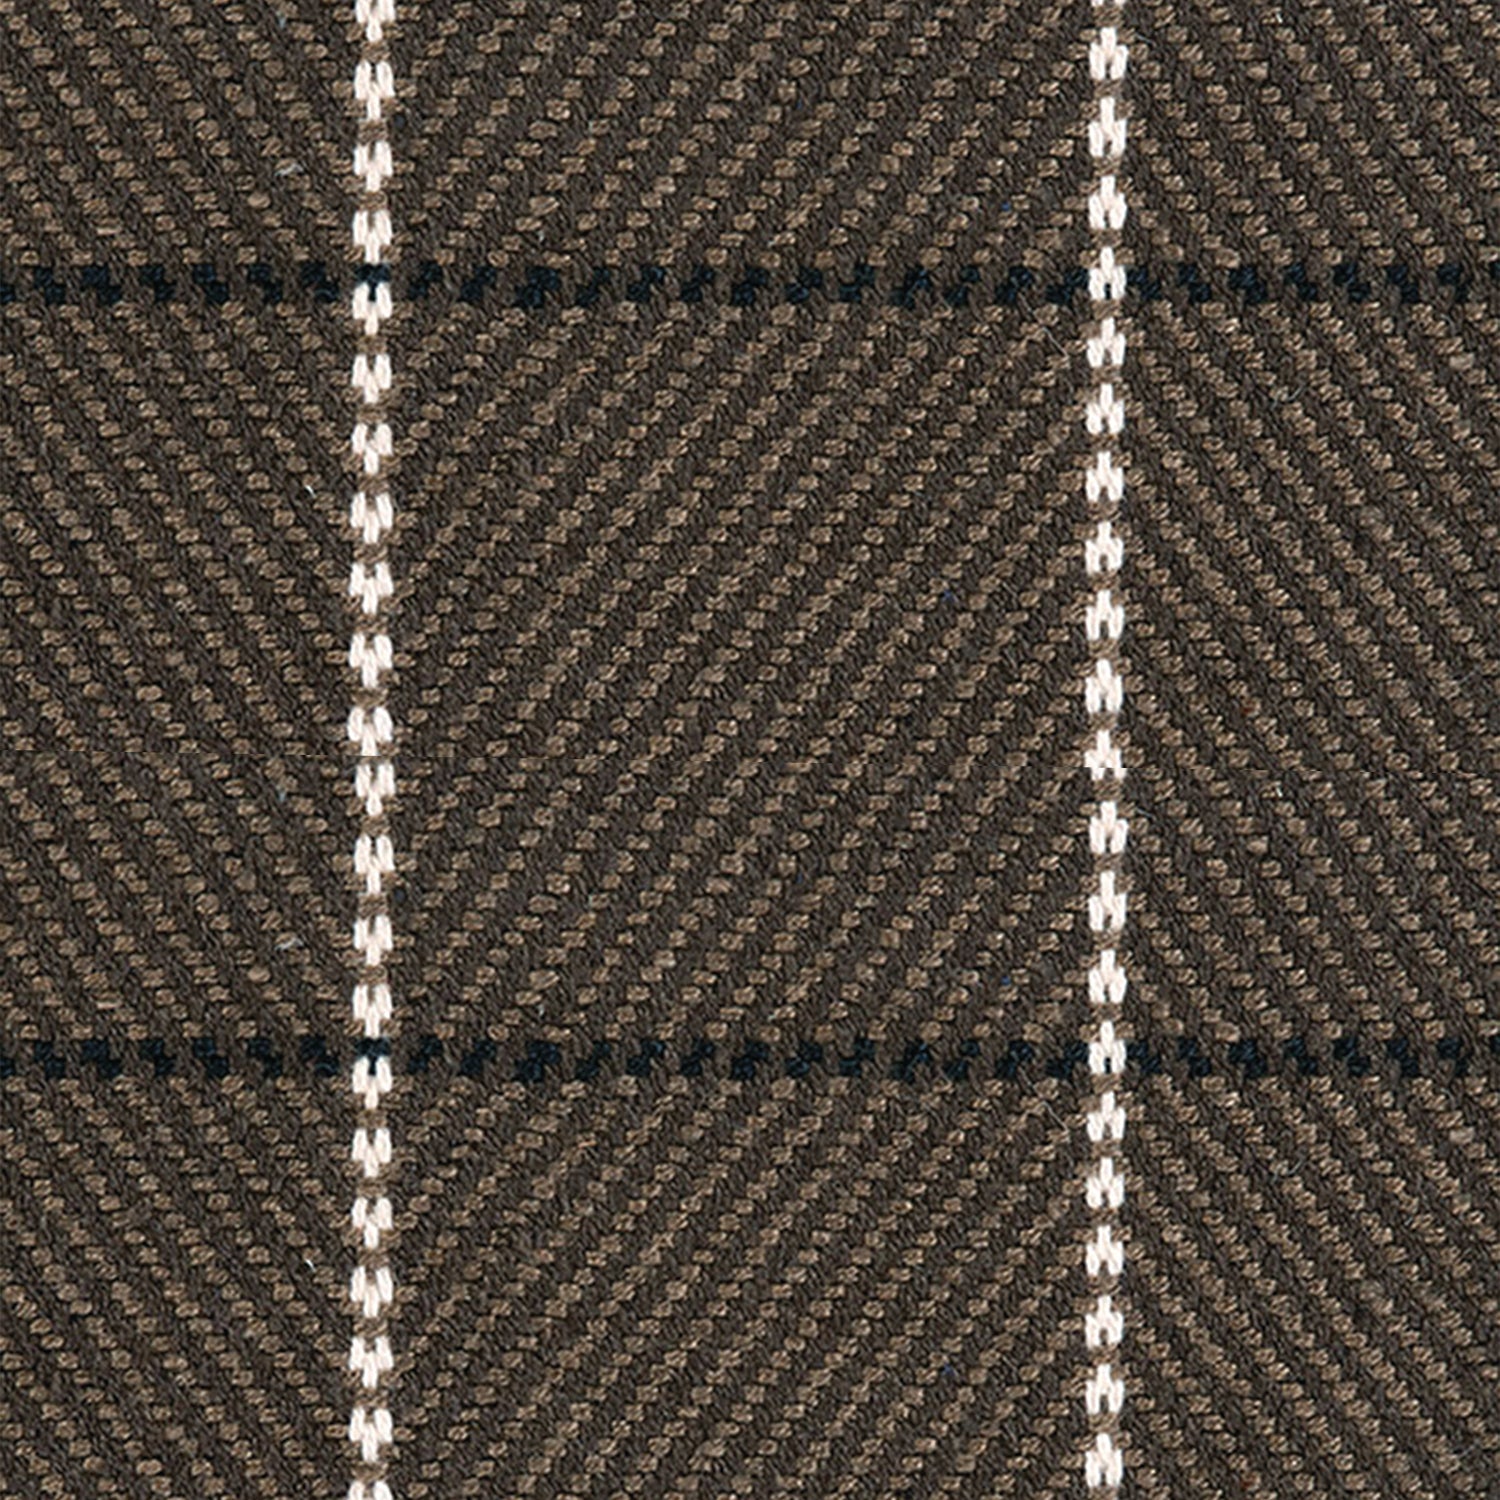 Outdoor broadloom carpet swatch in a plaid weave in shades of white, brown, and charcoal.